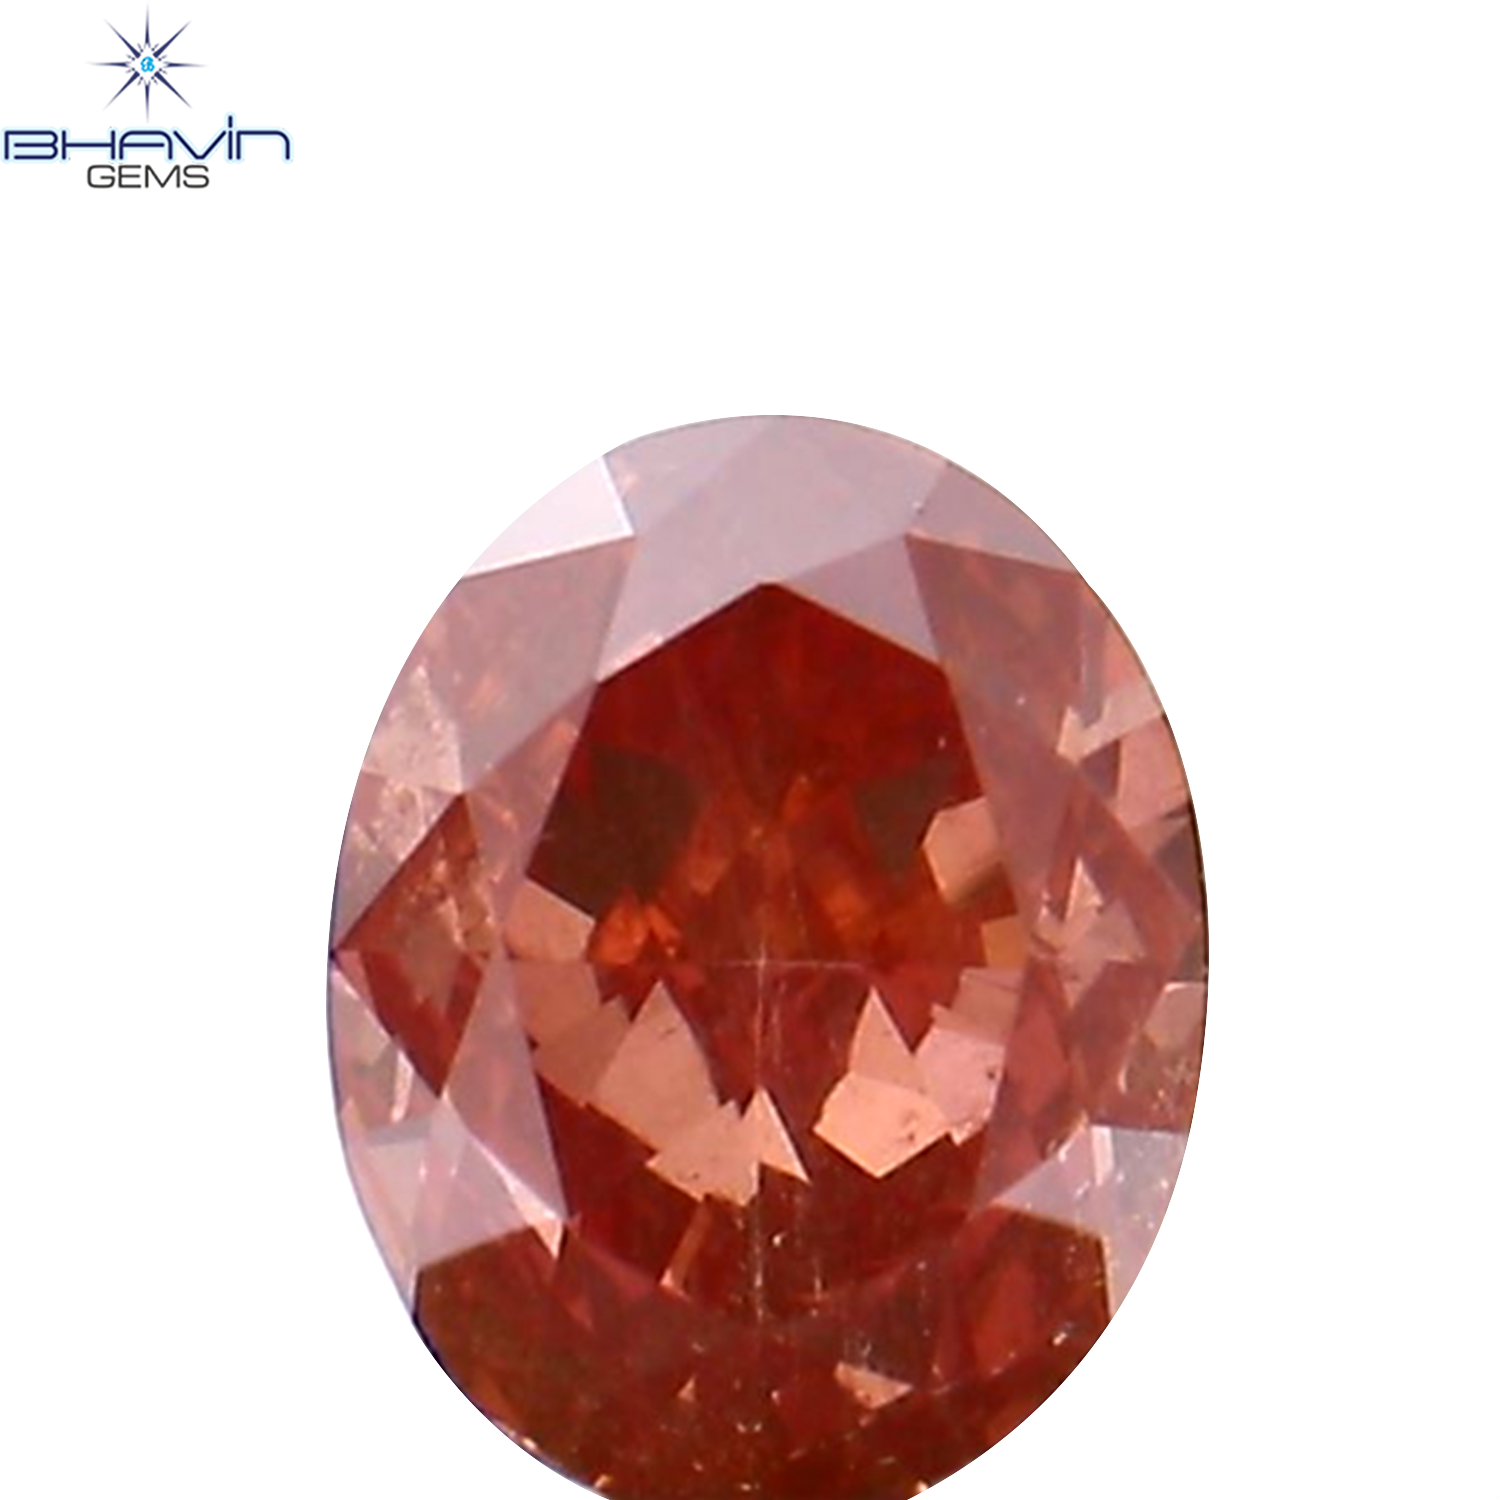 0.18 CT Oval Shape Natural Loose Diamond Pink Color VS2 Clarity (3.82 MM)